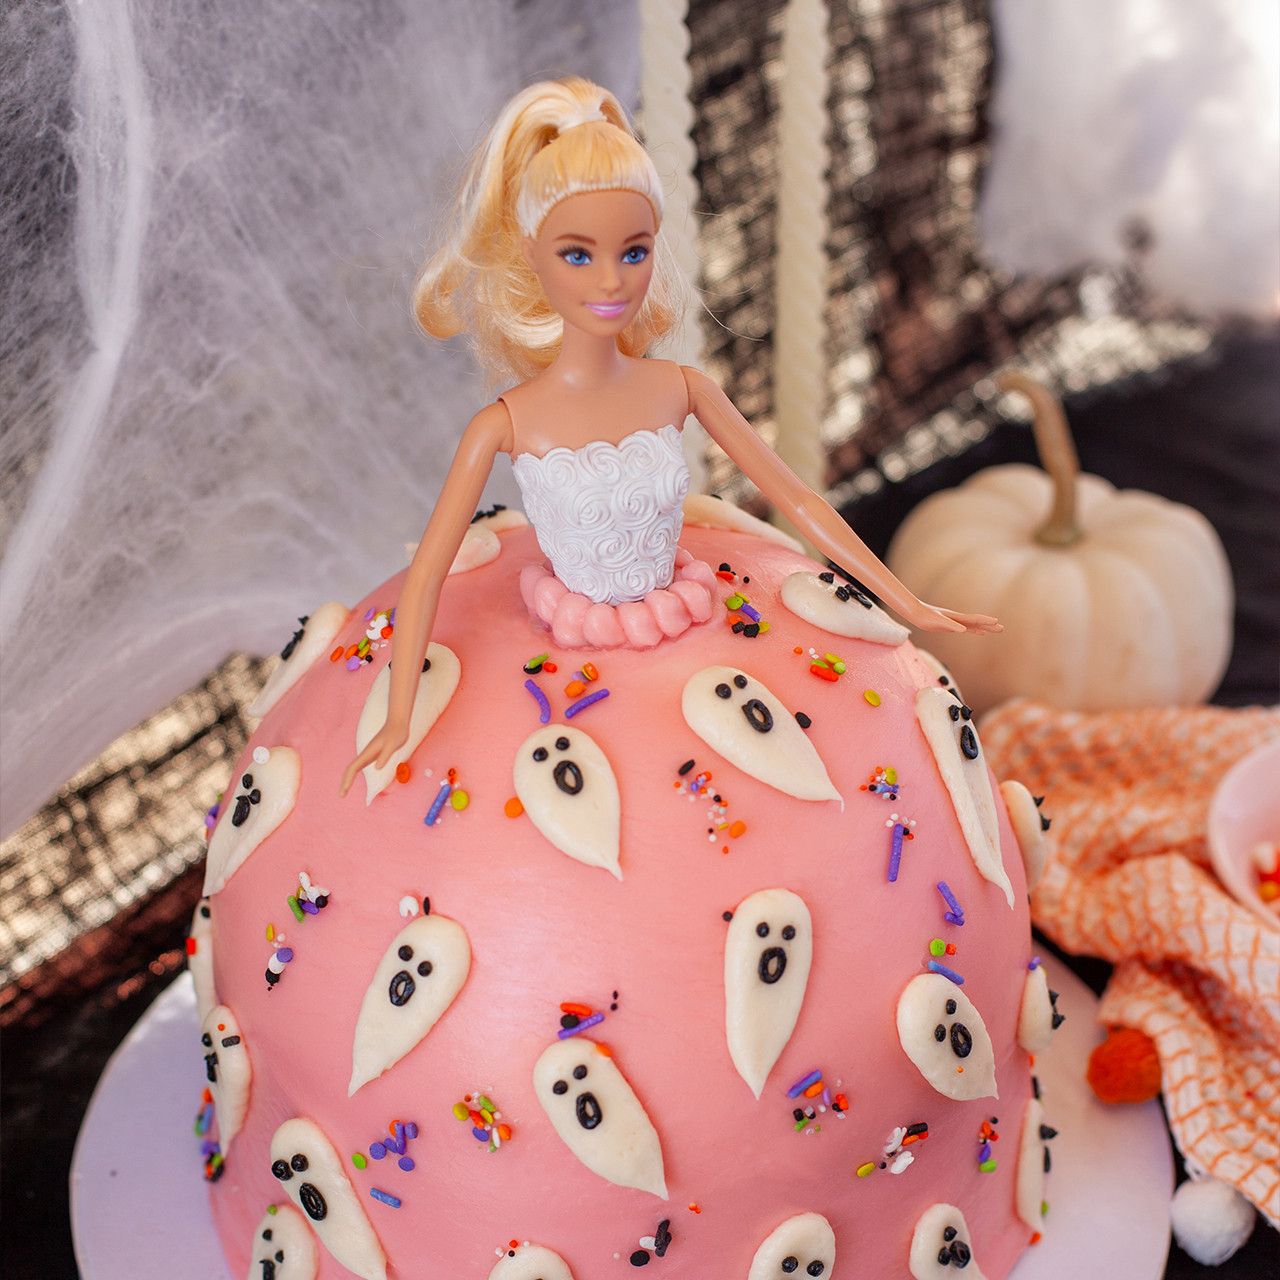 Asian Barbie Doll cake - “dressed up” with pastel colour cream swirls! Best  cake to celebrate birthday especially on public holiday, BUT… | Instagram